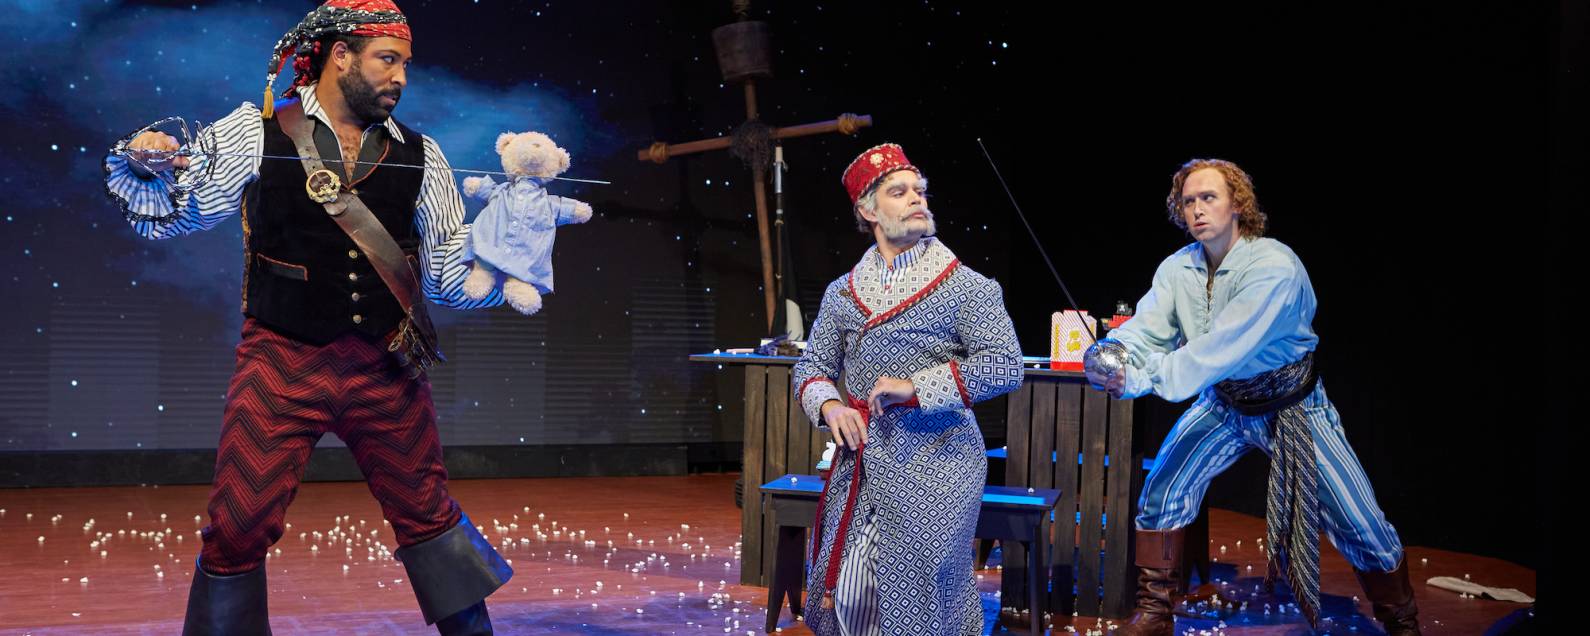 Two pirates duel with swords (and one stray teddy bear) in a scene from The Pirates of Penzance.